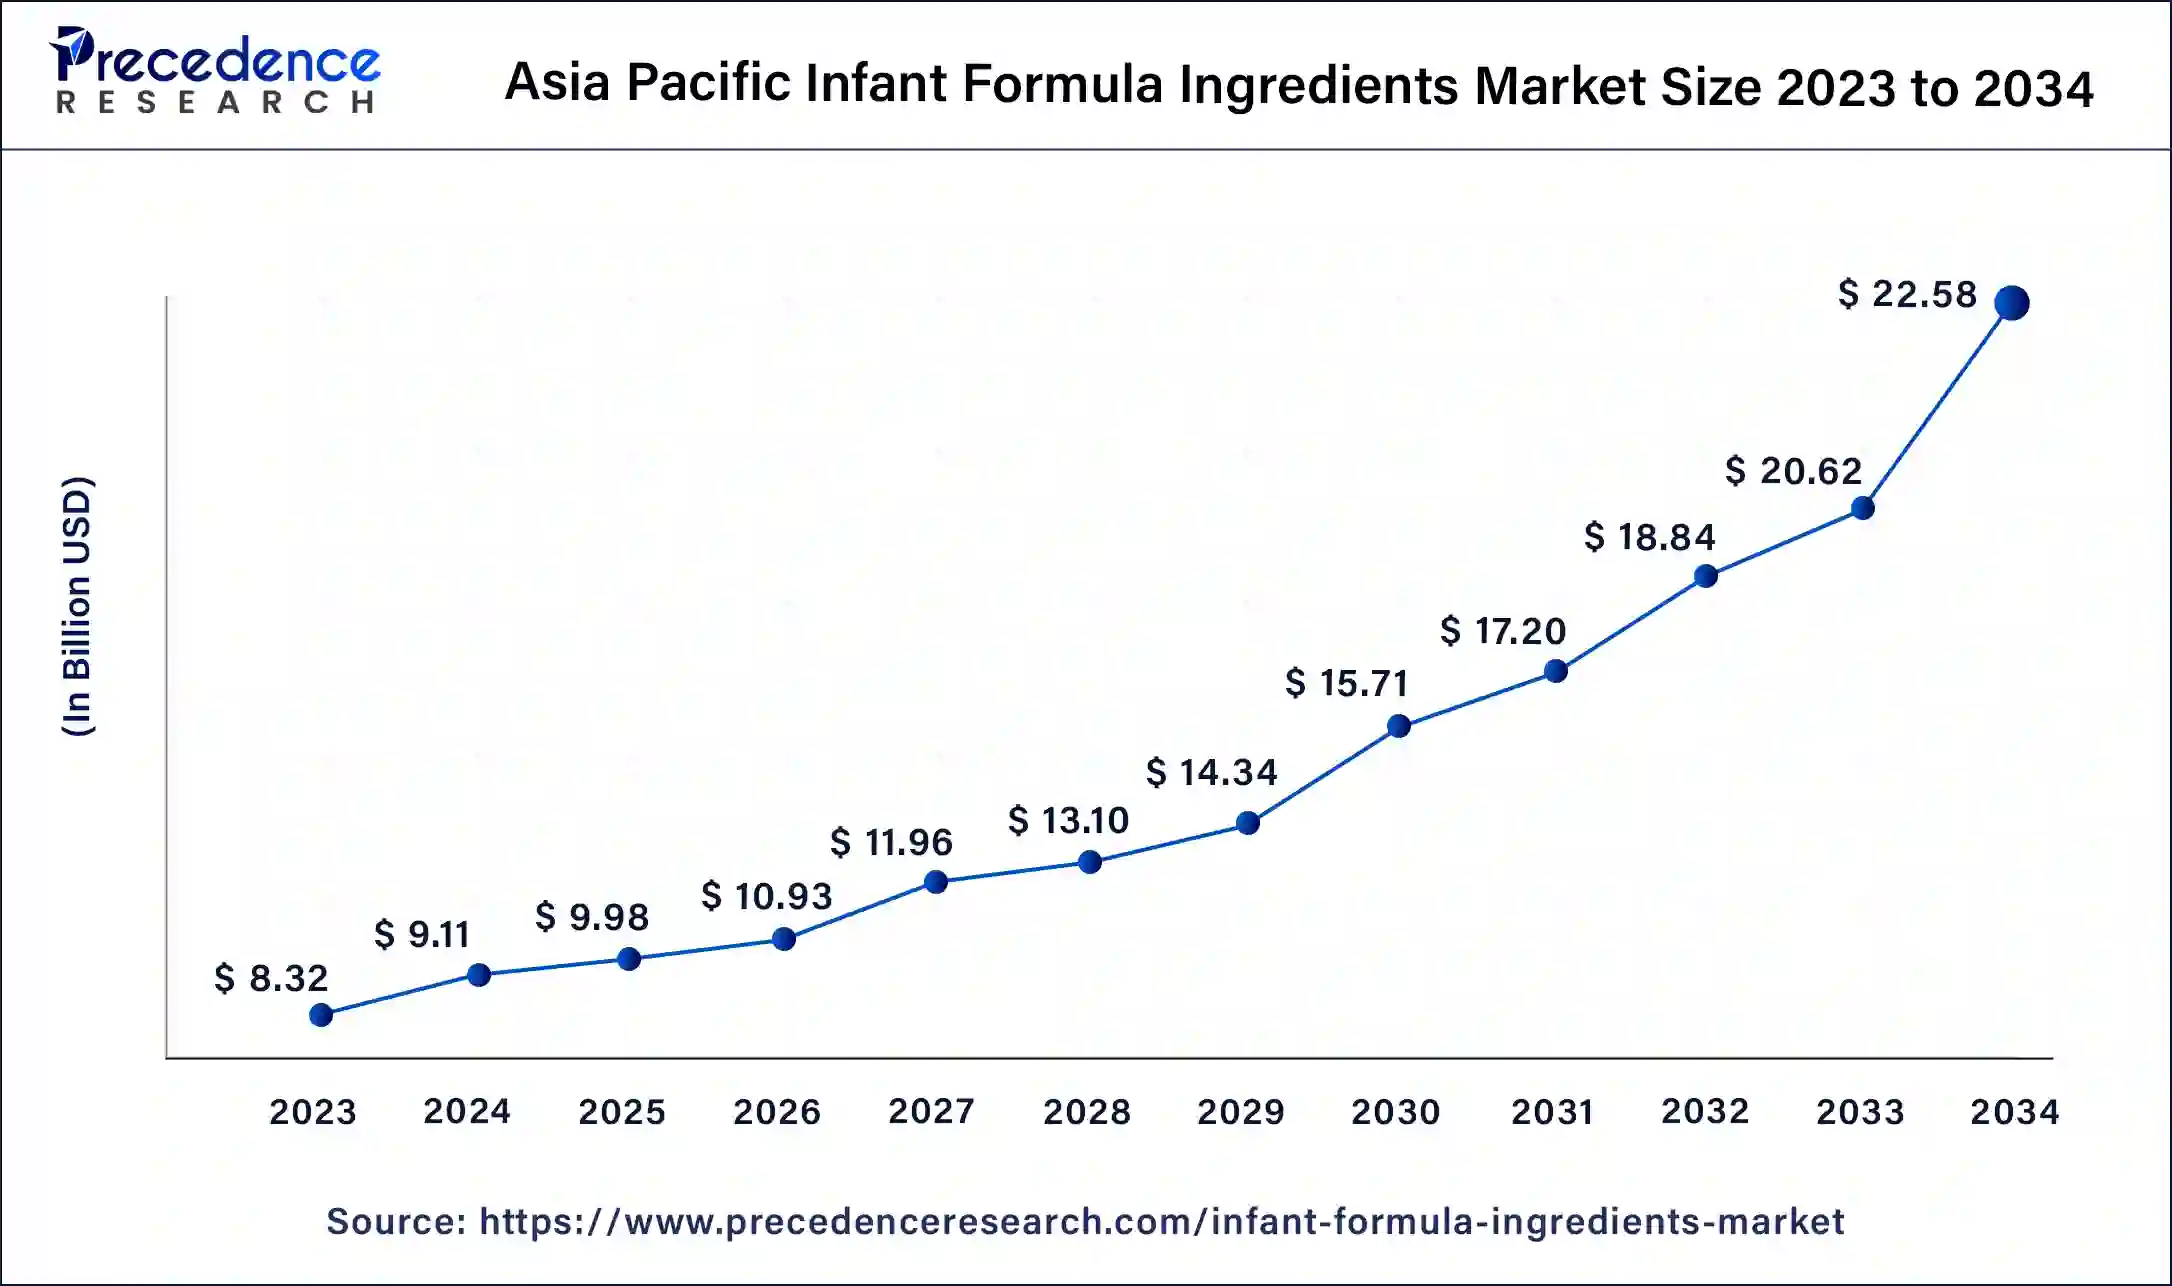 Asia Pacific Infant Formula Ingredients Market Size 2024 to 2034